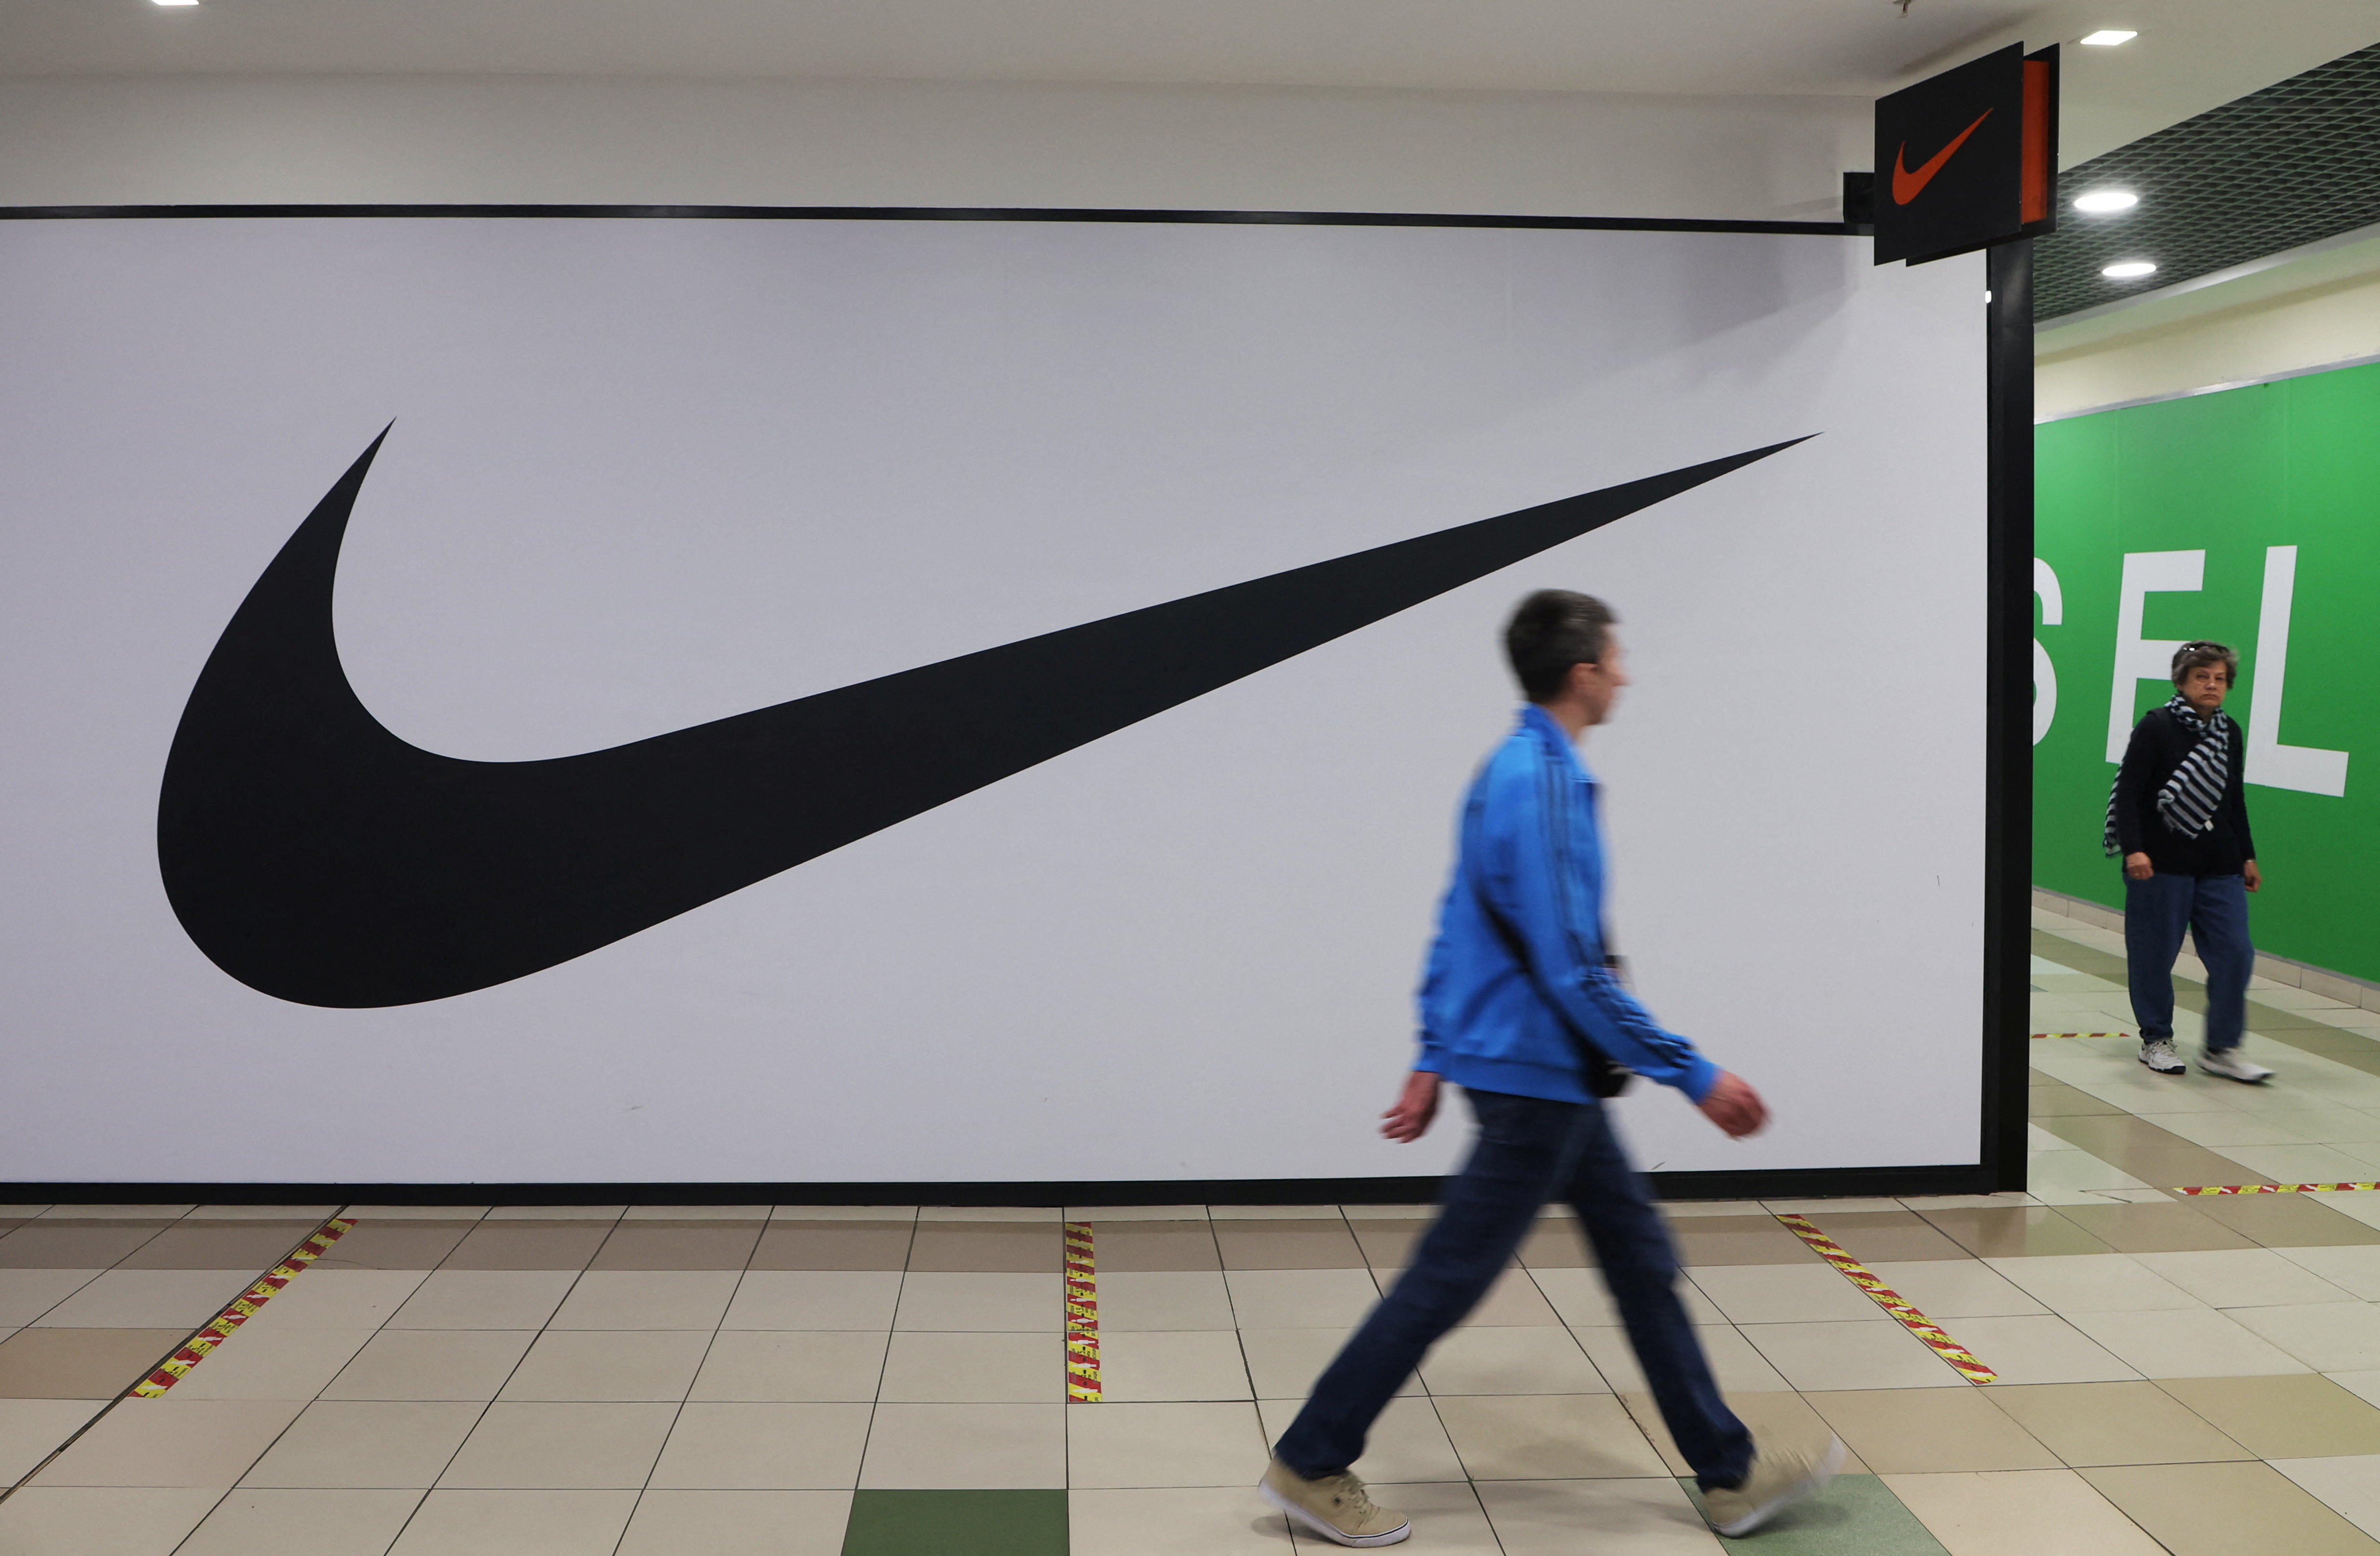 Auckland una taza de Abstracción Nike not renewing franchise agreements in Russia - newspaper | Reuters